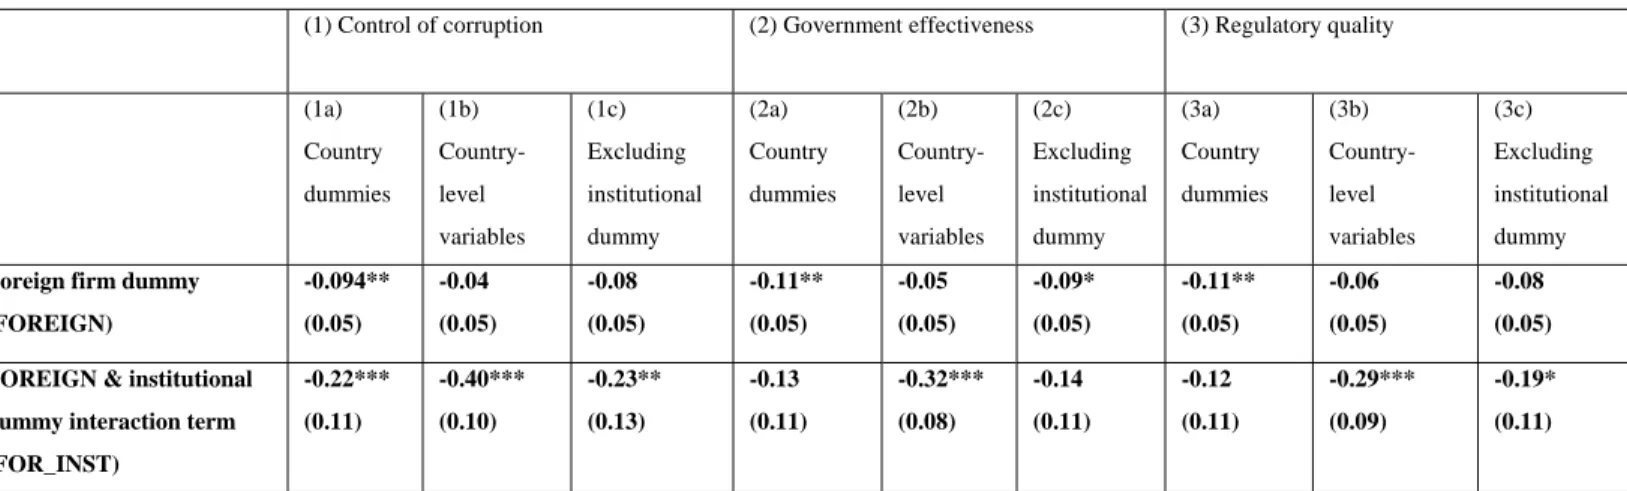 Table 9 Institutional contexts and foreign privilege: Dependent variable==TXREG4 